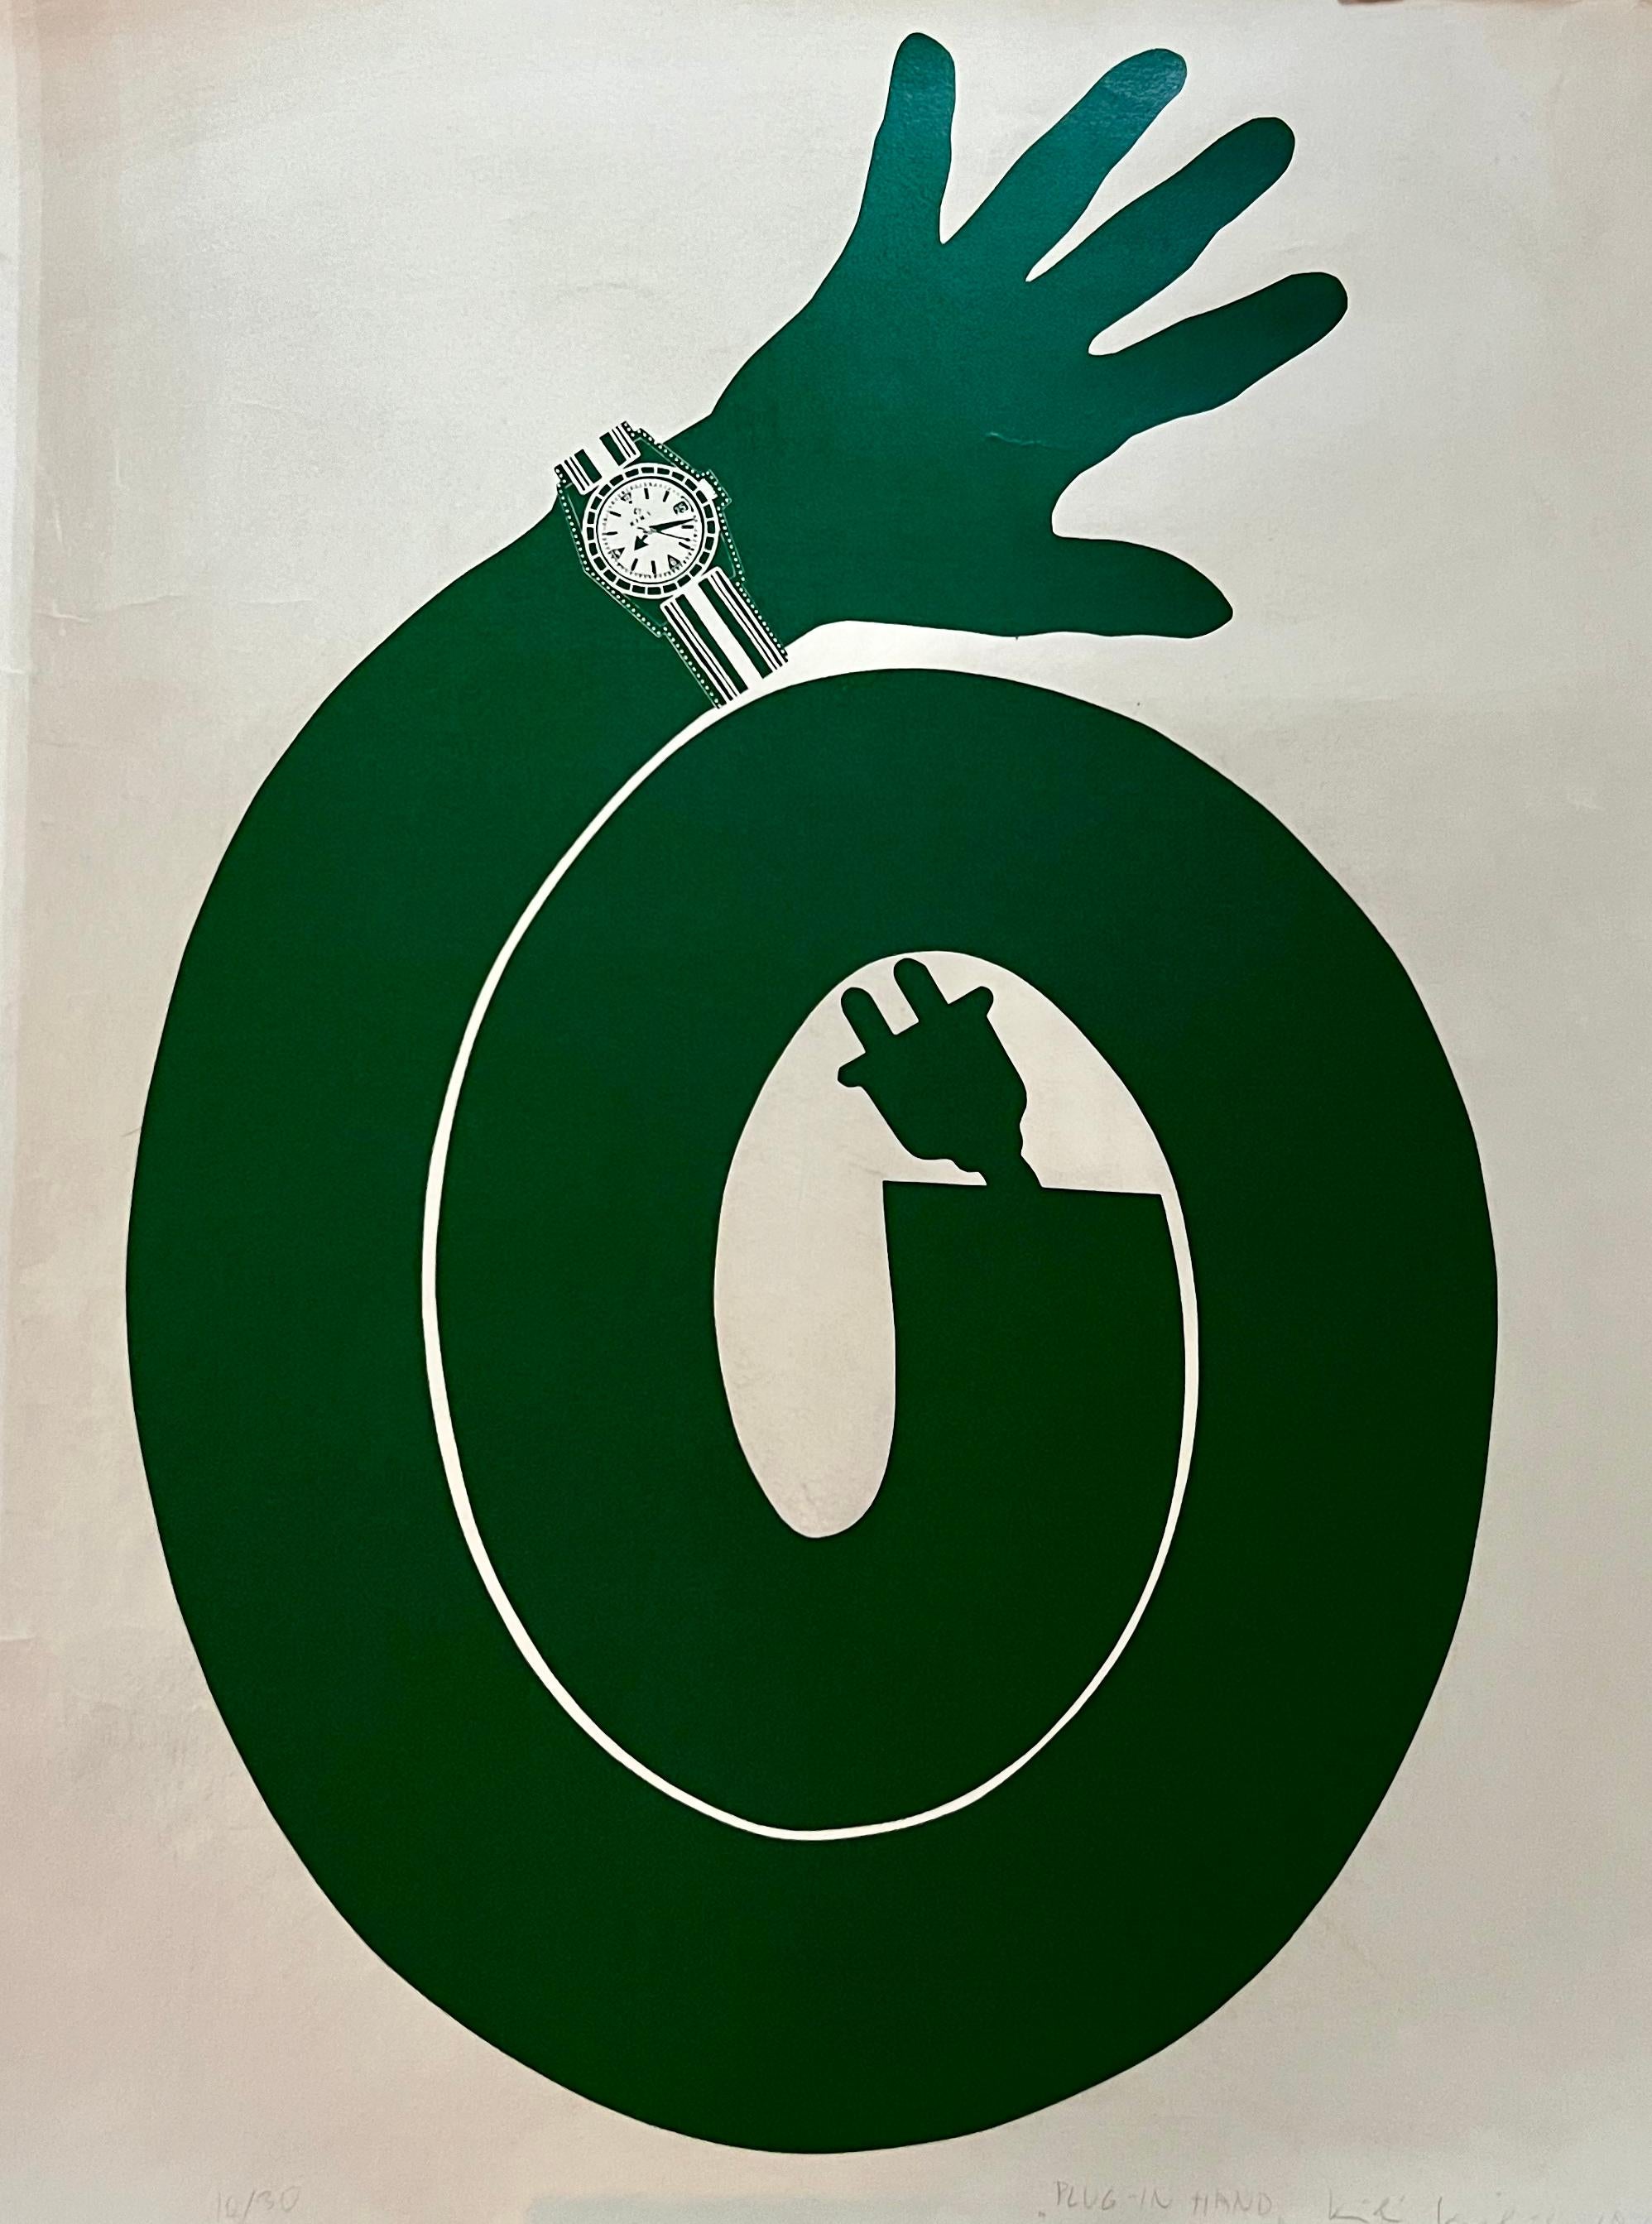 Plug in Hand Silkscreen on Paper Signed Lithography by Kiki Kogelnik in 1968 For Sale 1